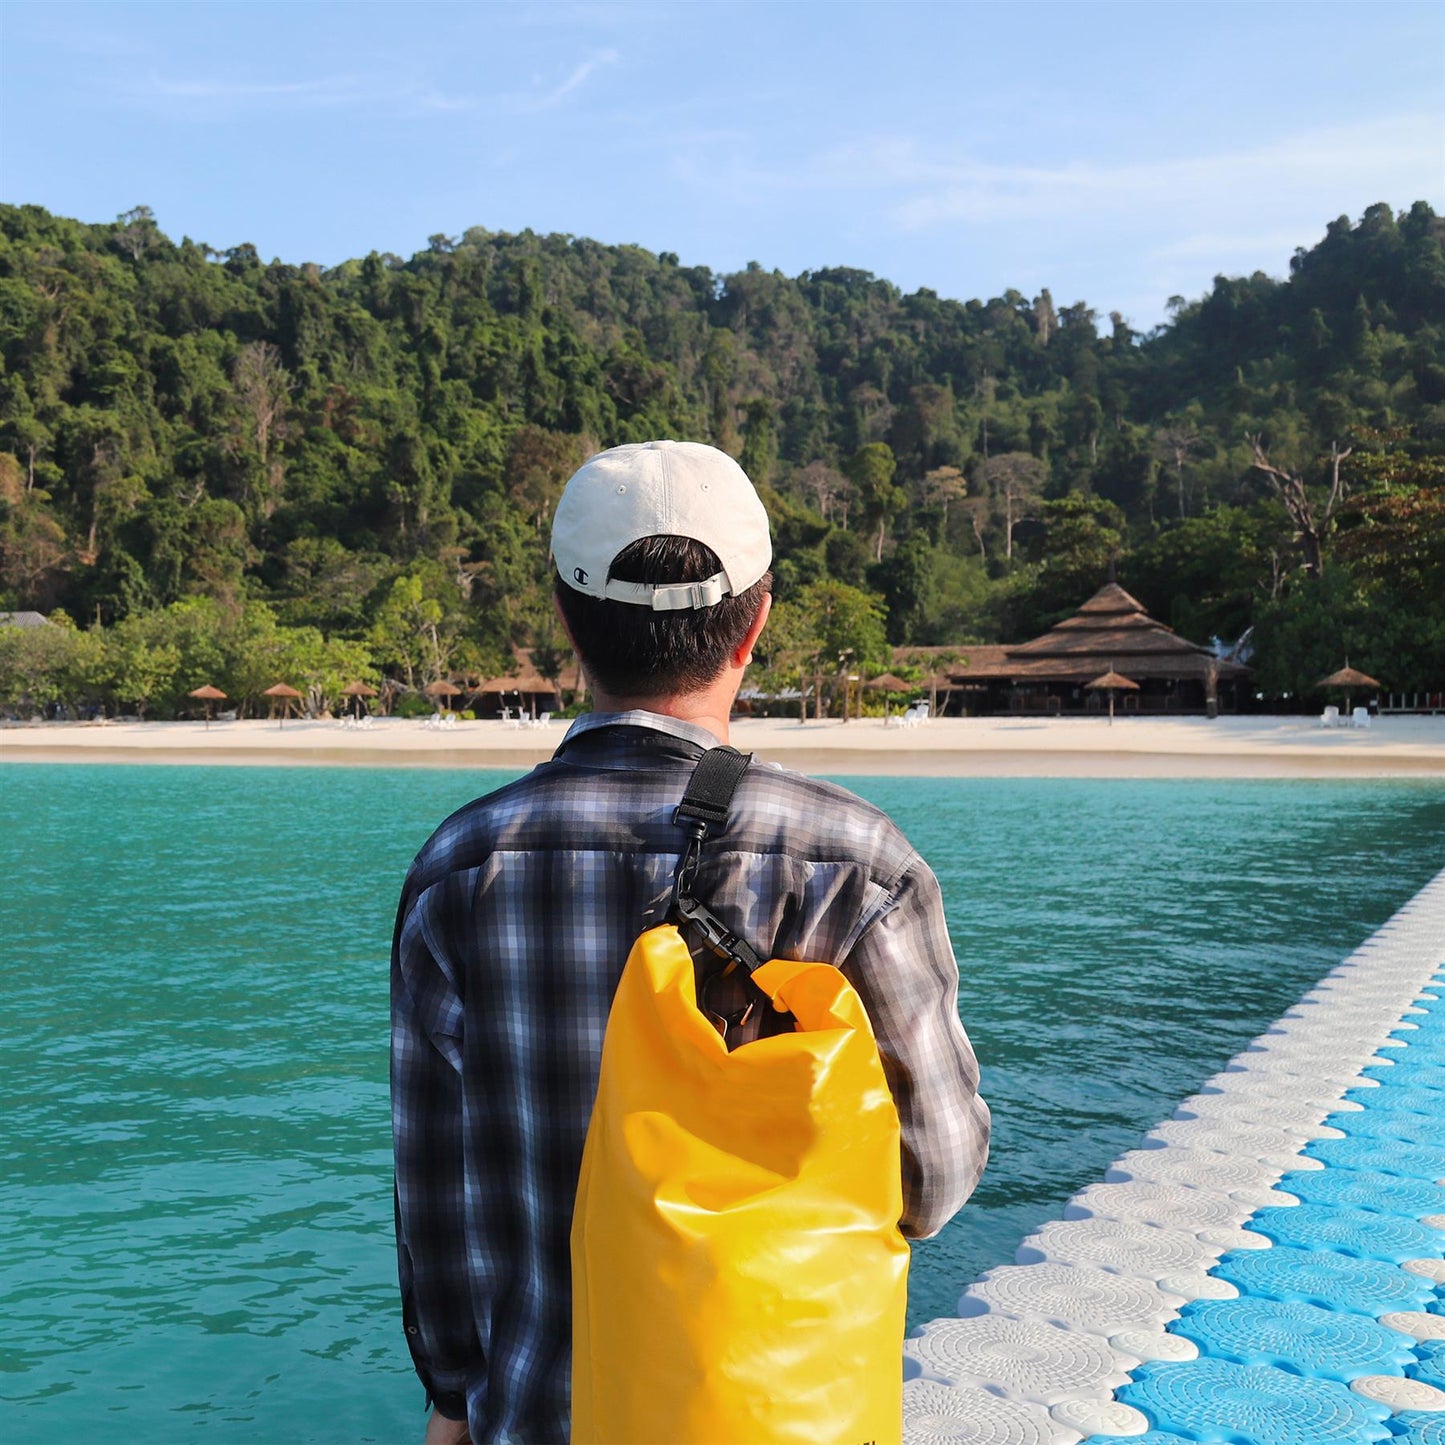 Waterproof Floating Dry Bag For Boating And Kayaking